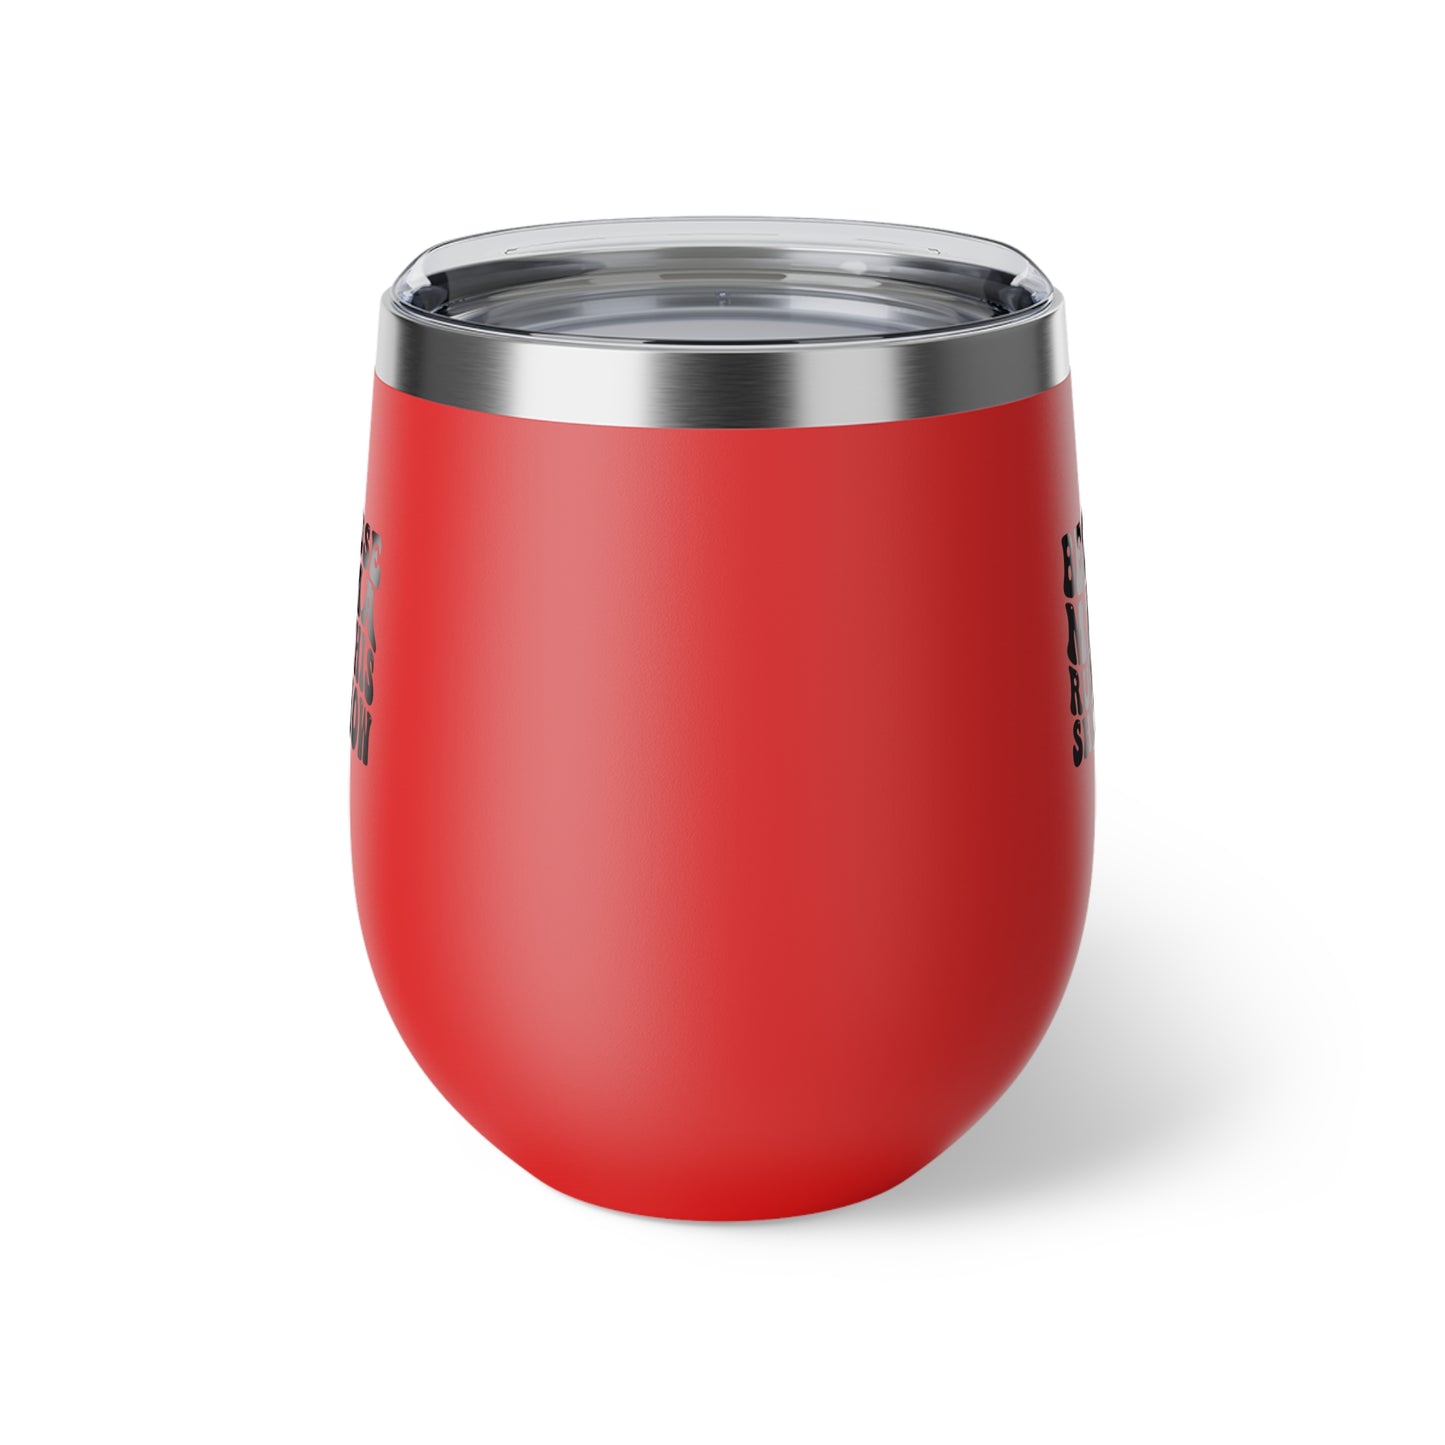 Because Mama Runs This Shitshow Copper Vacuum Insulated Cup, 12oz